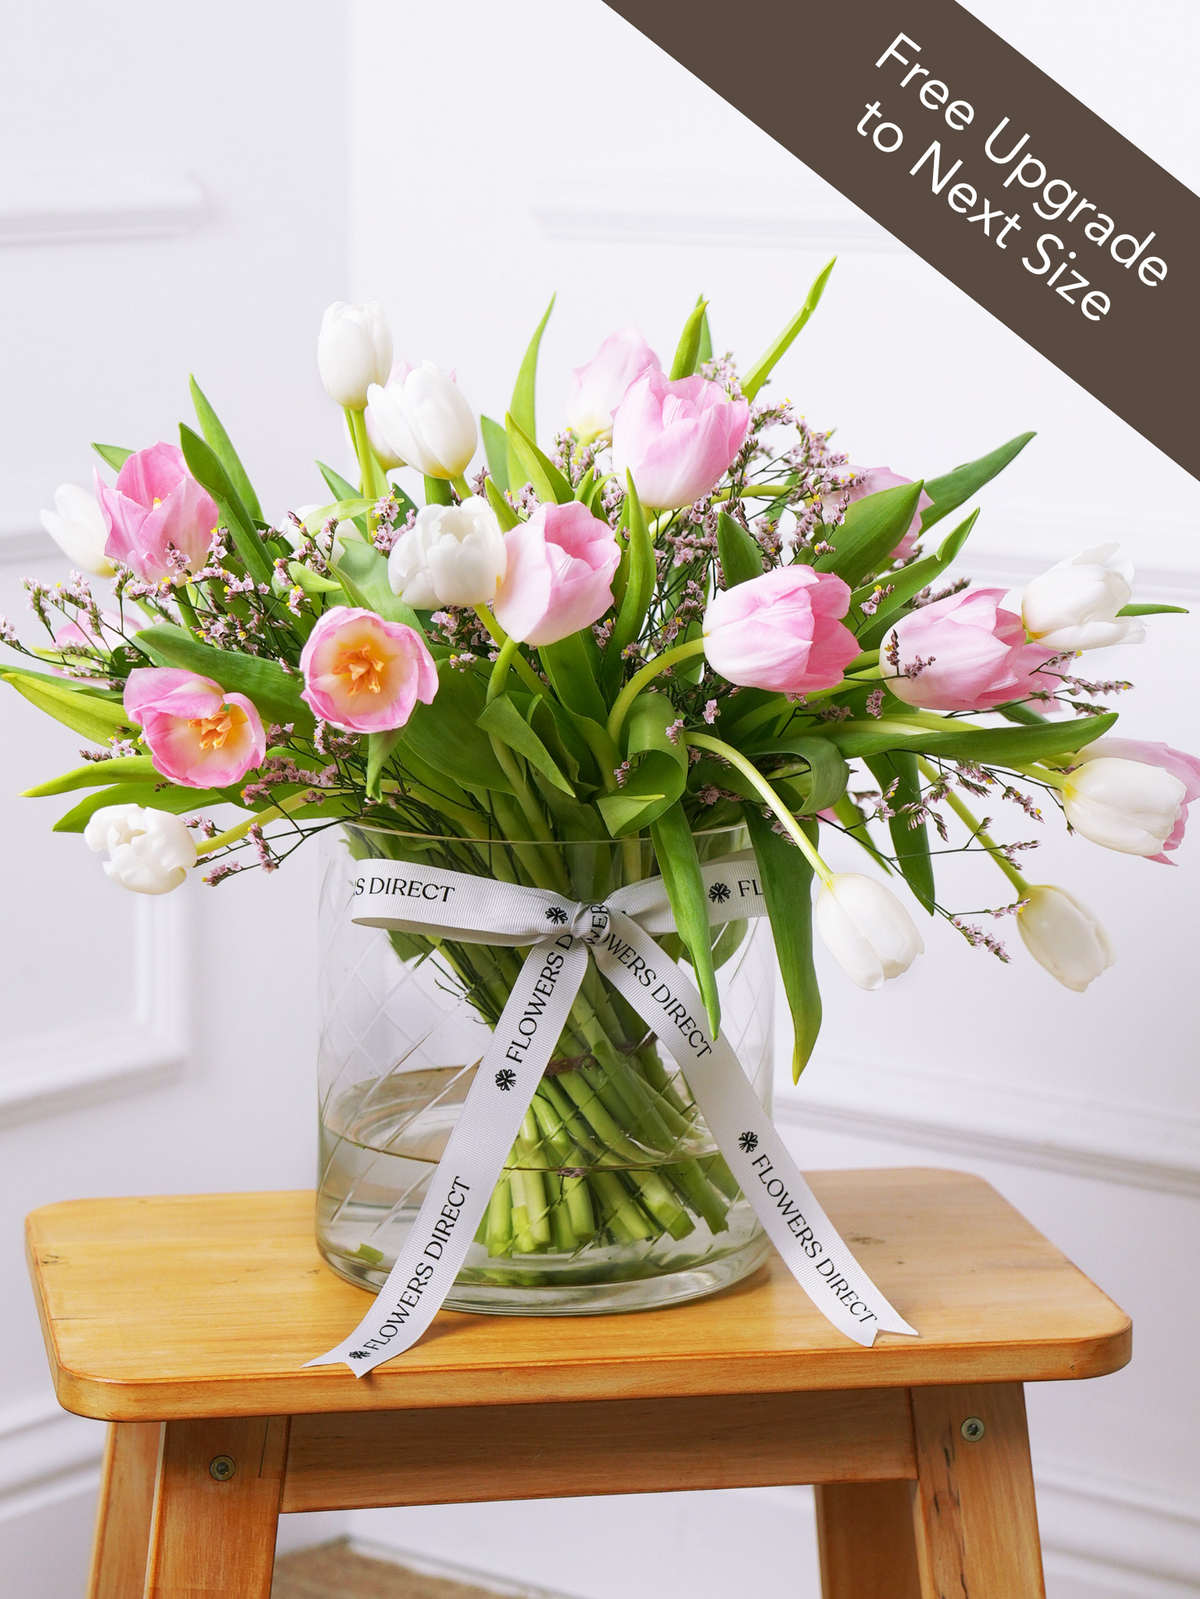 Mixed Tulips - Vase with Free Upgrade to Next Size